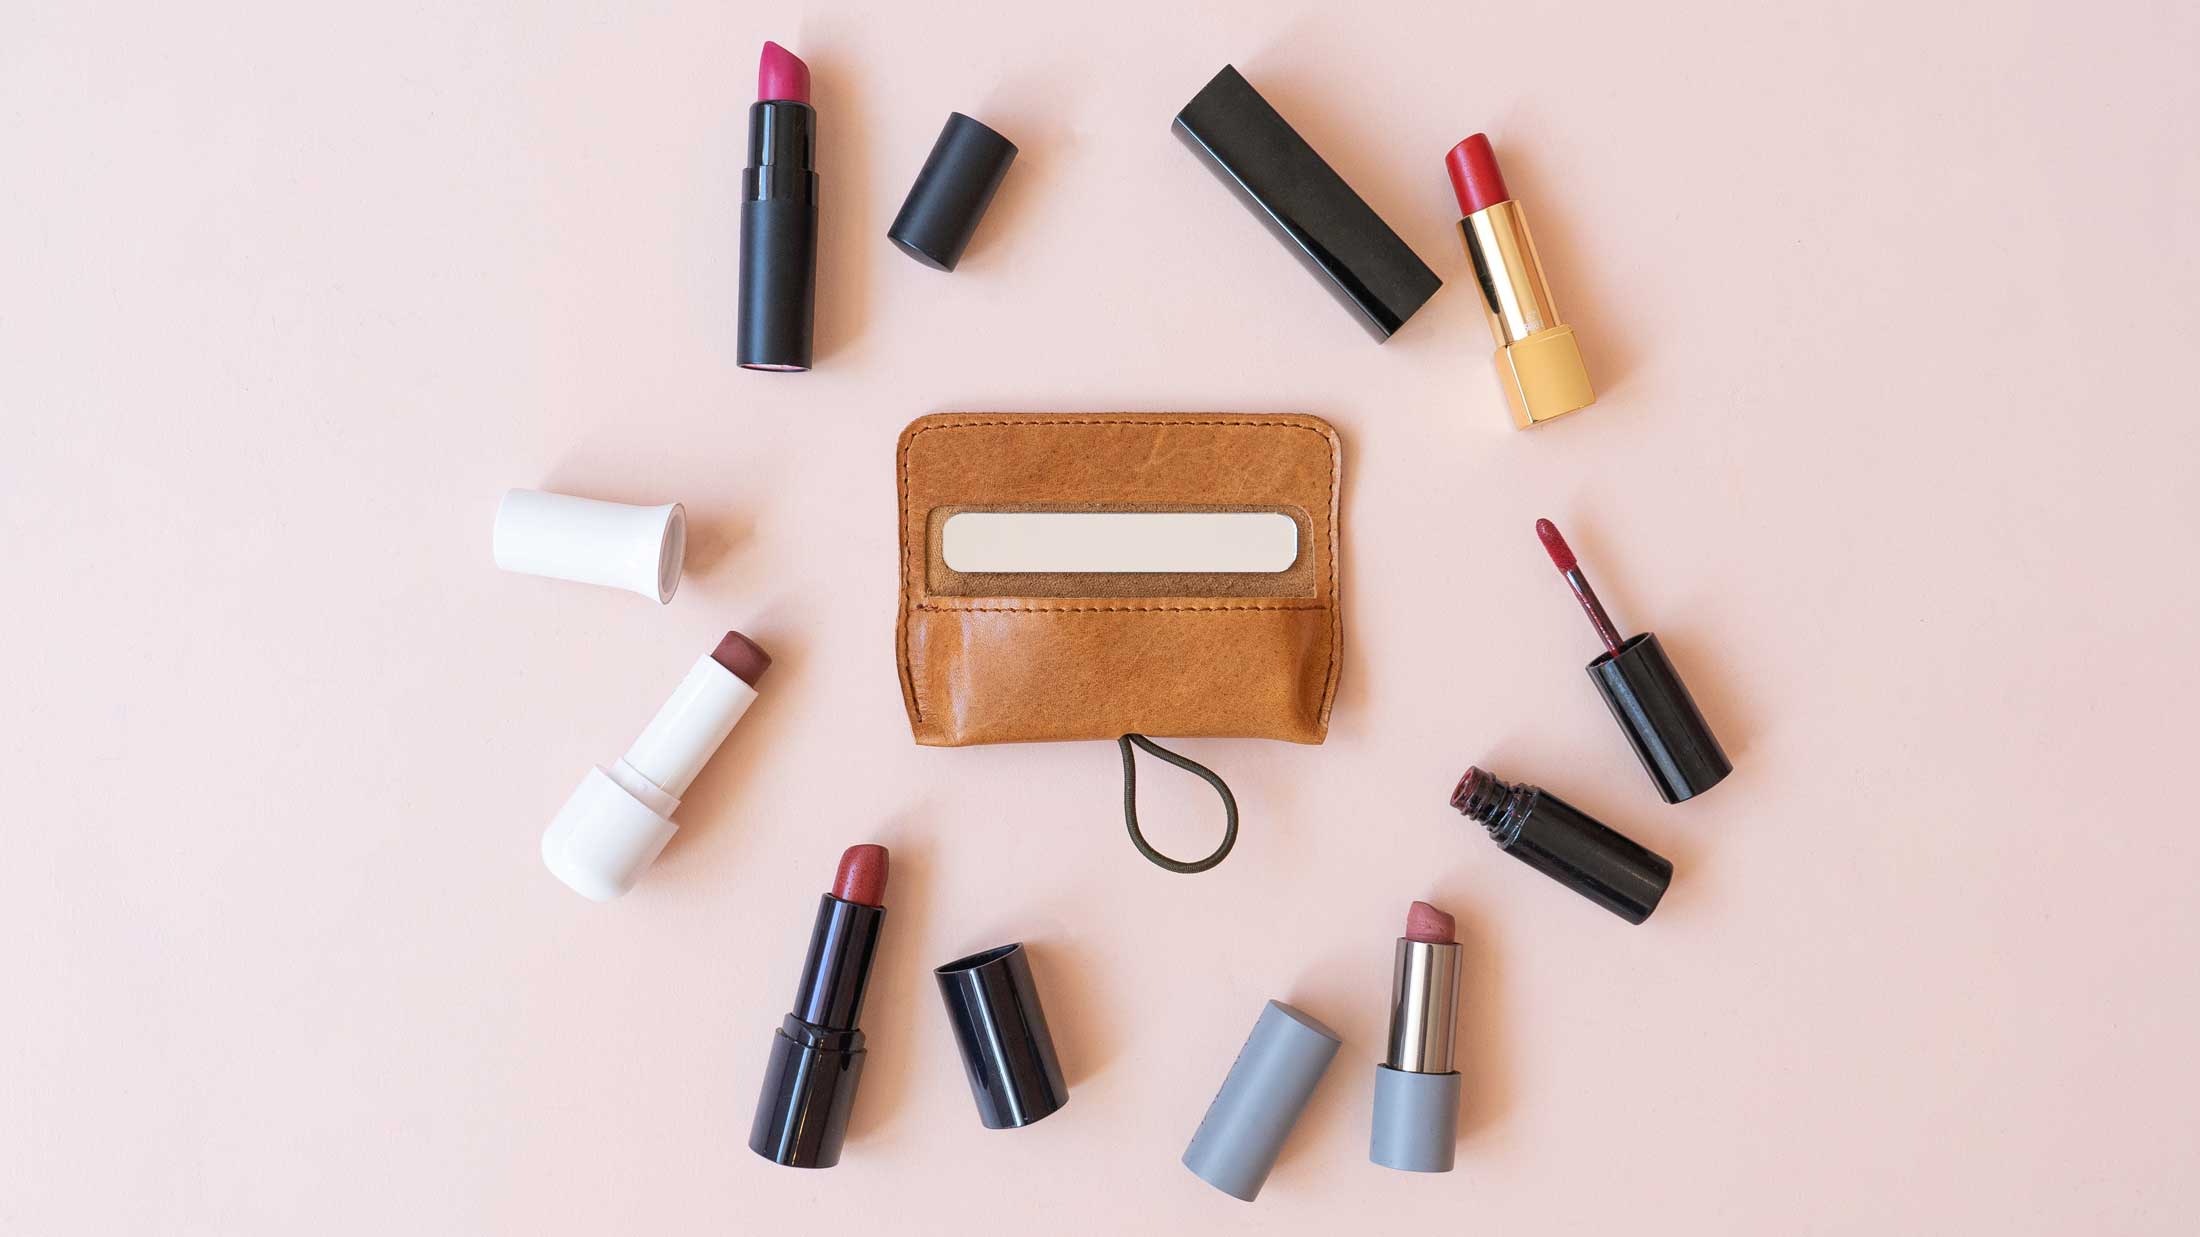 The small luxury for the handbag - in our case fit lipsticks in standard sizes.